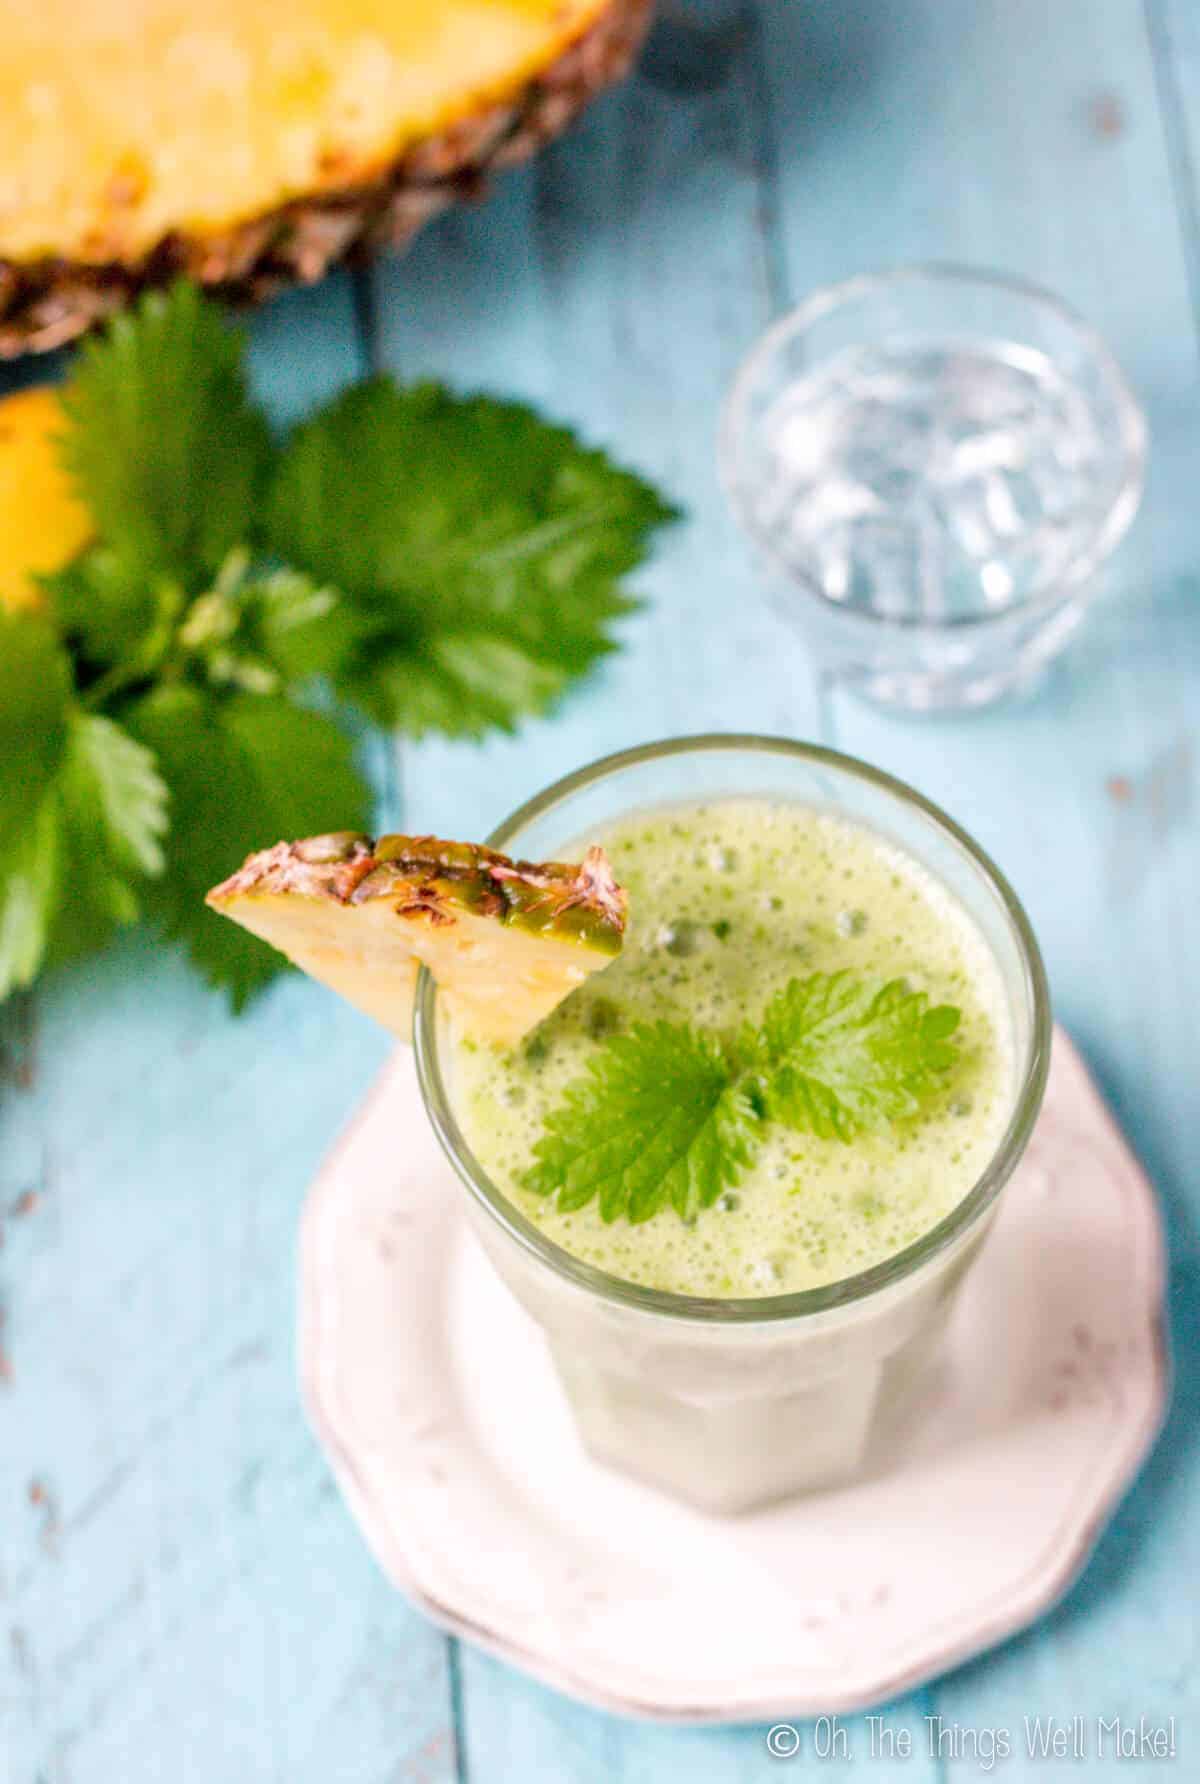 photo of stinging nettle smoothie next to nettle leaves and pineapple